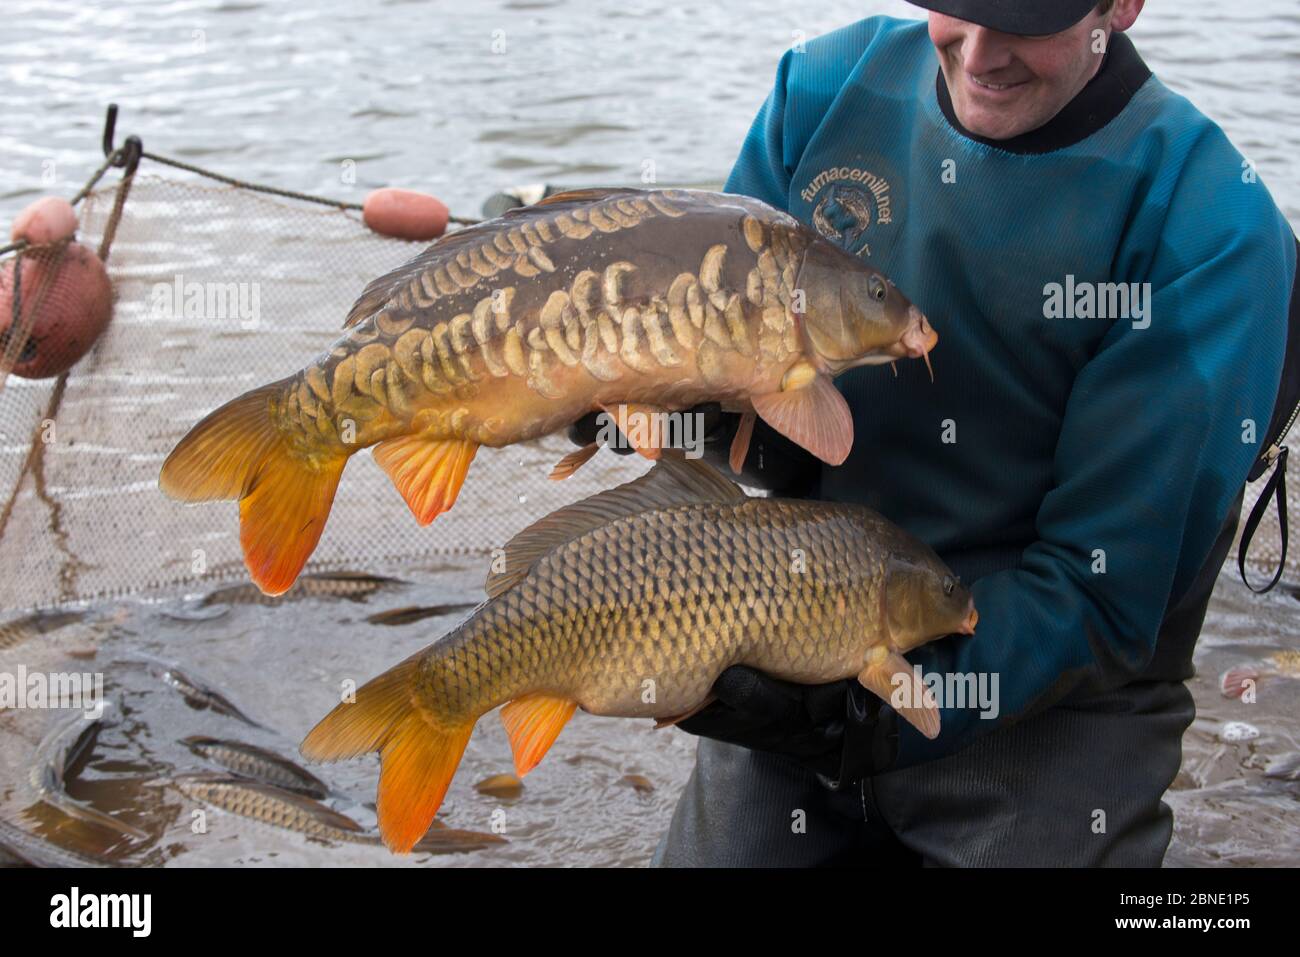 Common carp (Cyprinus carpio)  wild type and Mirror carp mutation held side by side for comparison during fish survey of pools, Herefordshire, England Stock Photo